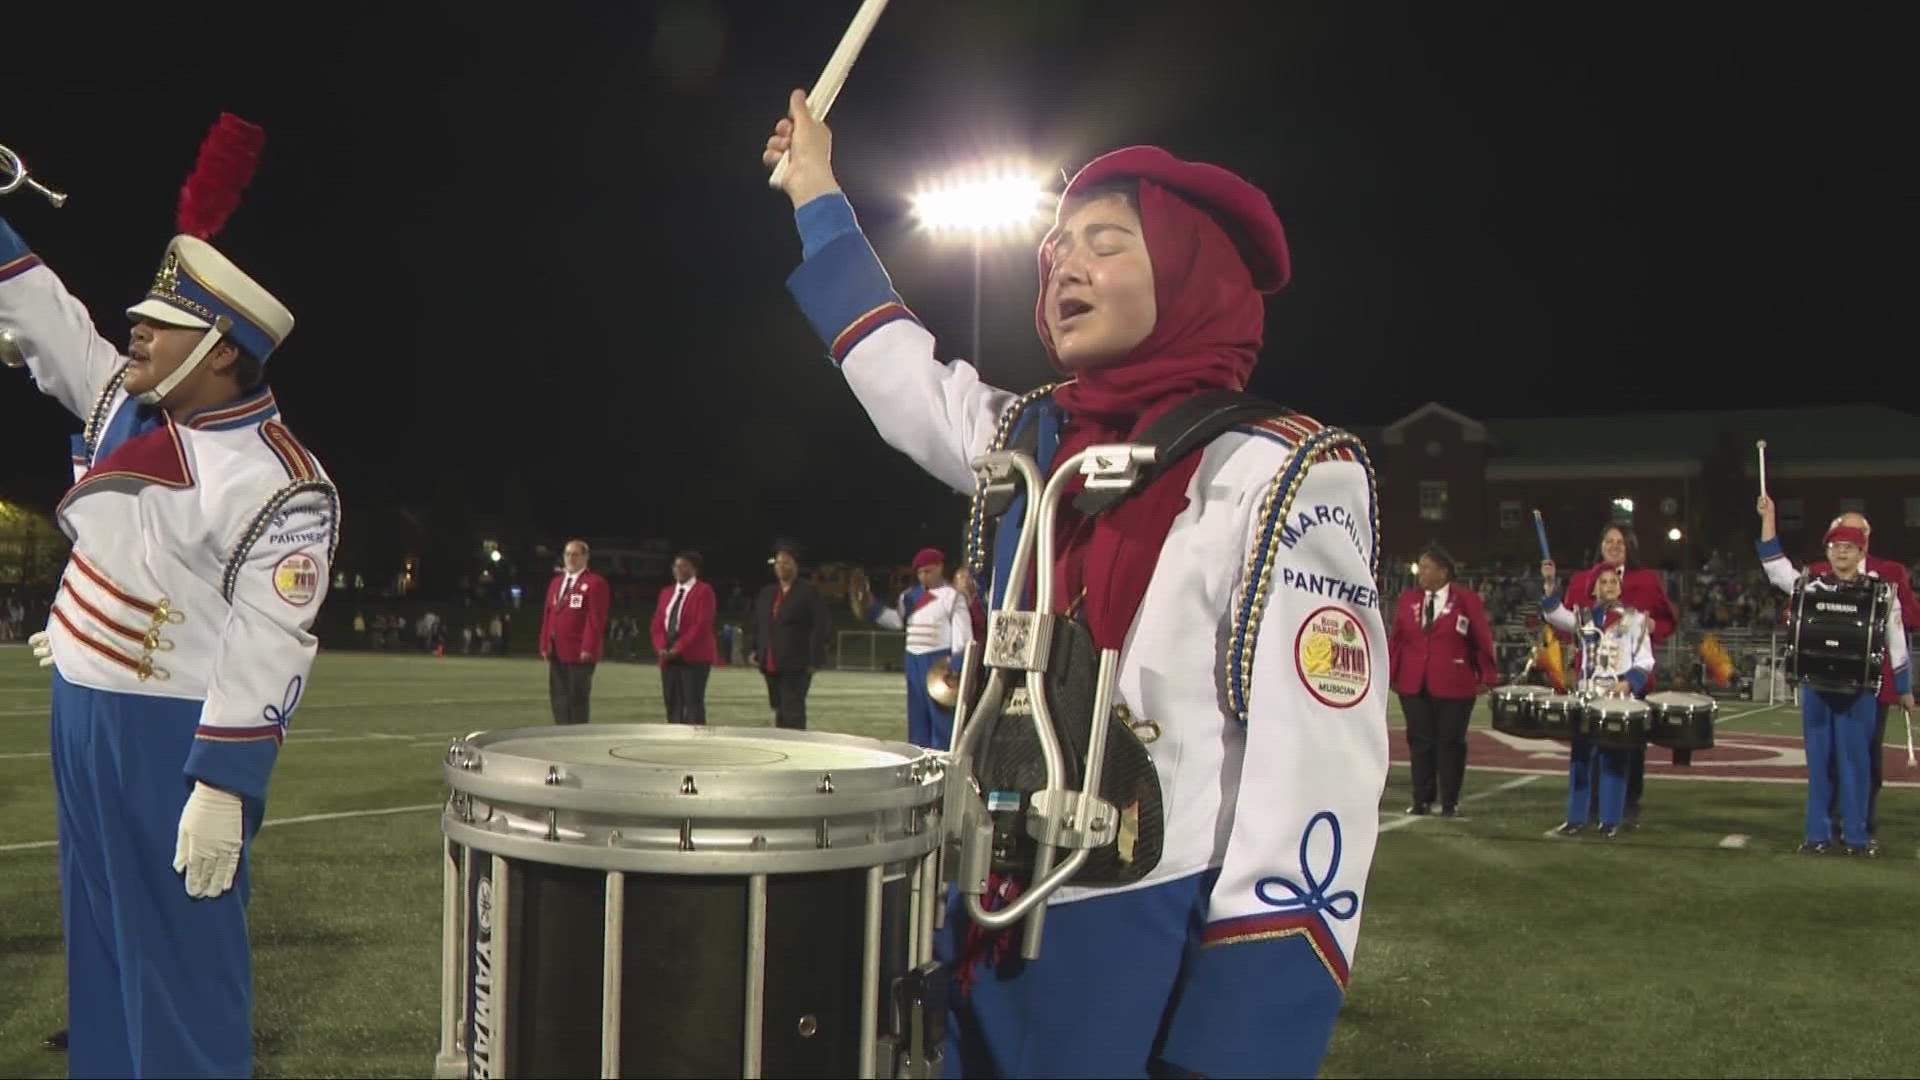 As the Ohio State Buckeyes gear up to take on Michigan, 3News takes a look at another marching band from Columbus with a special meaning.